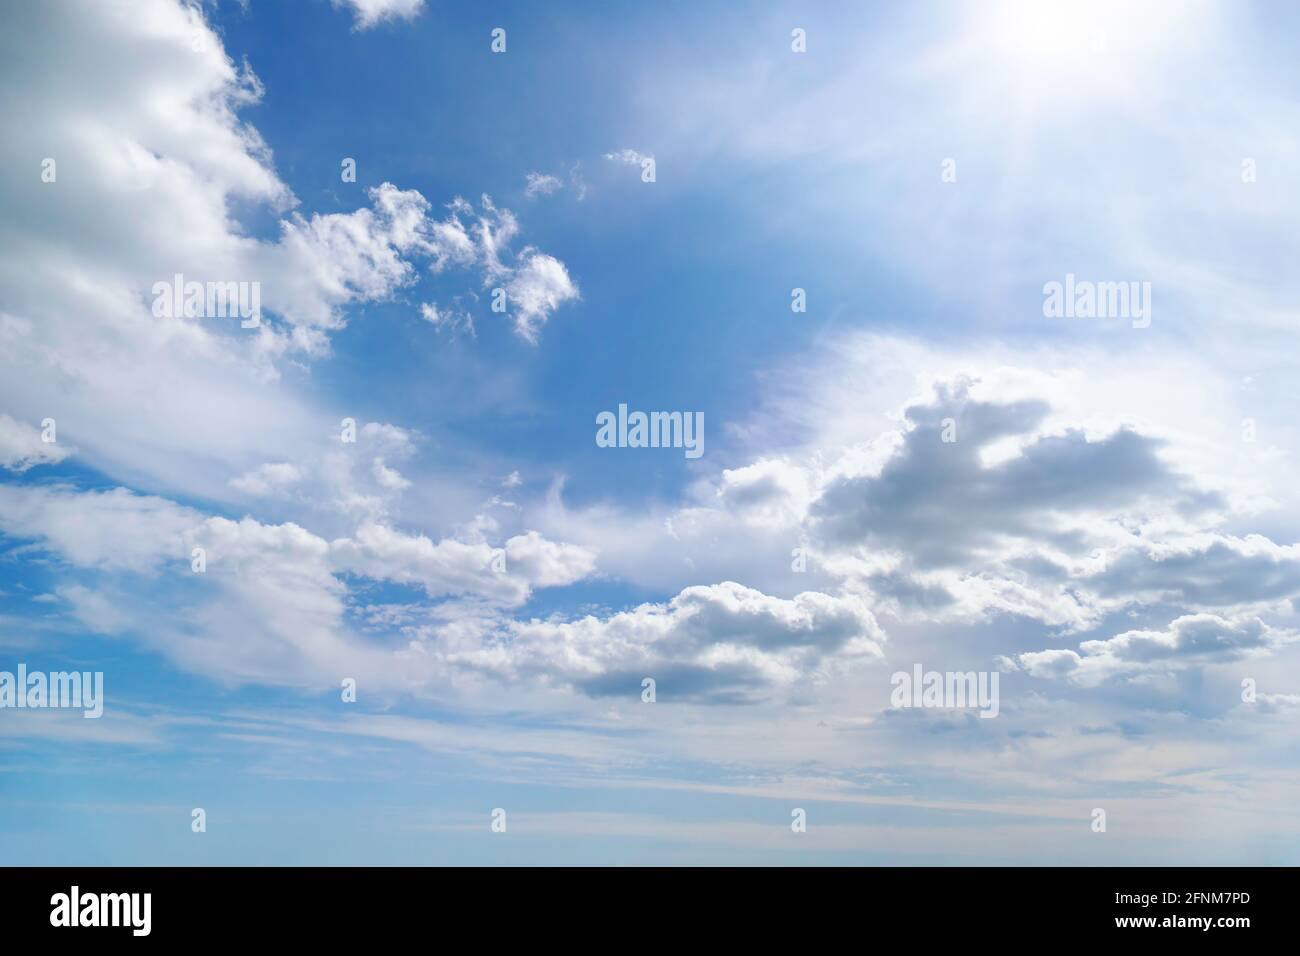 Bright summer sun on blue sky with white fluffy clouds. Stock Photo